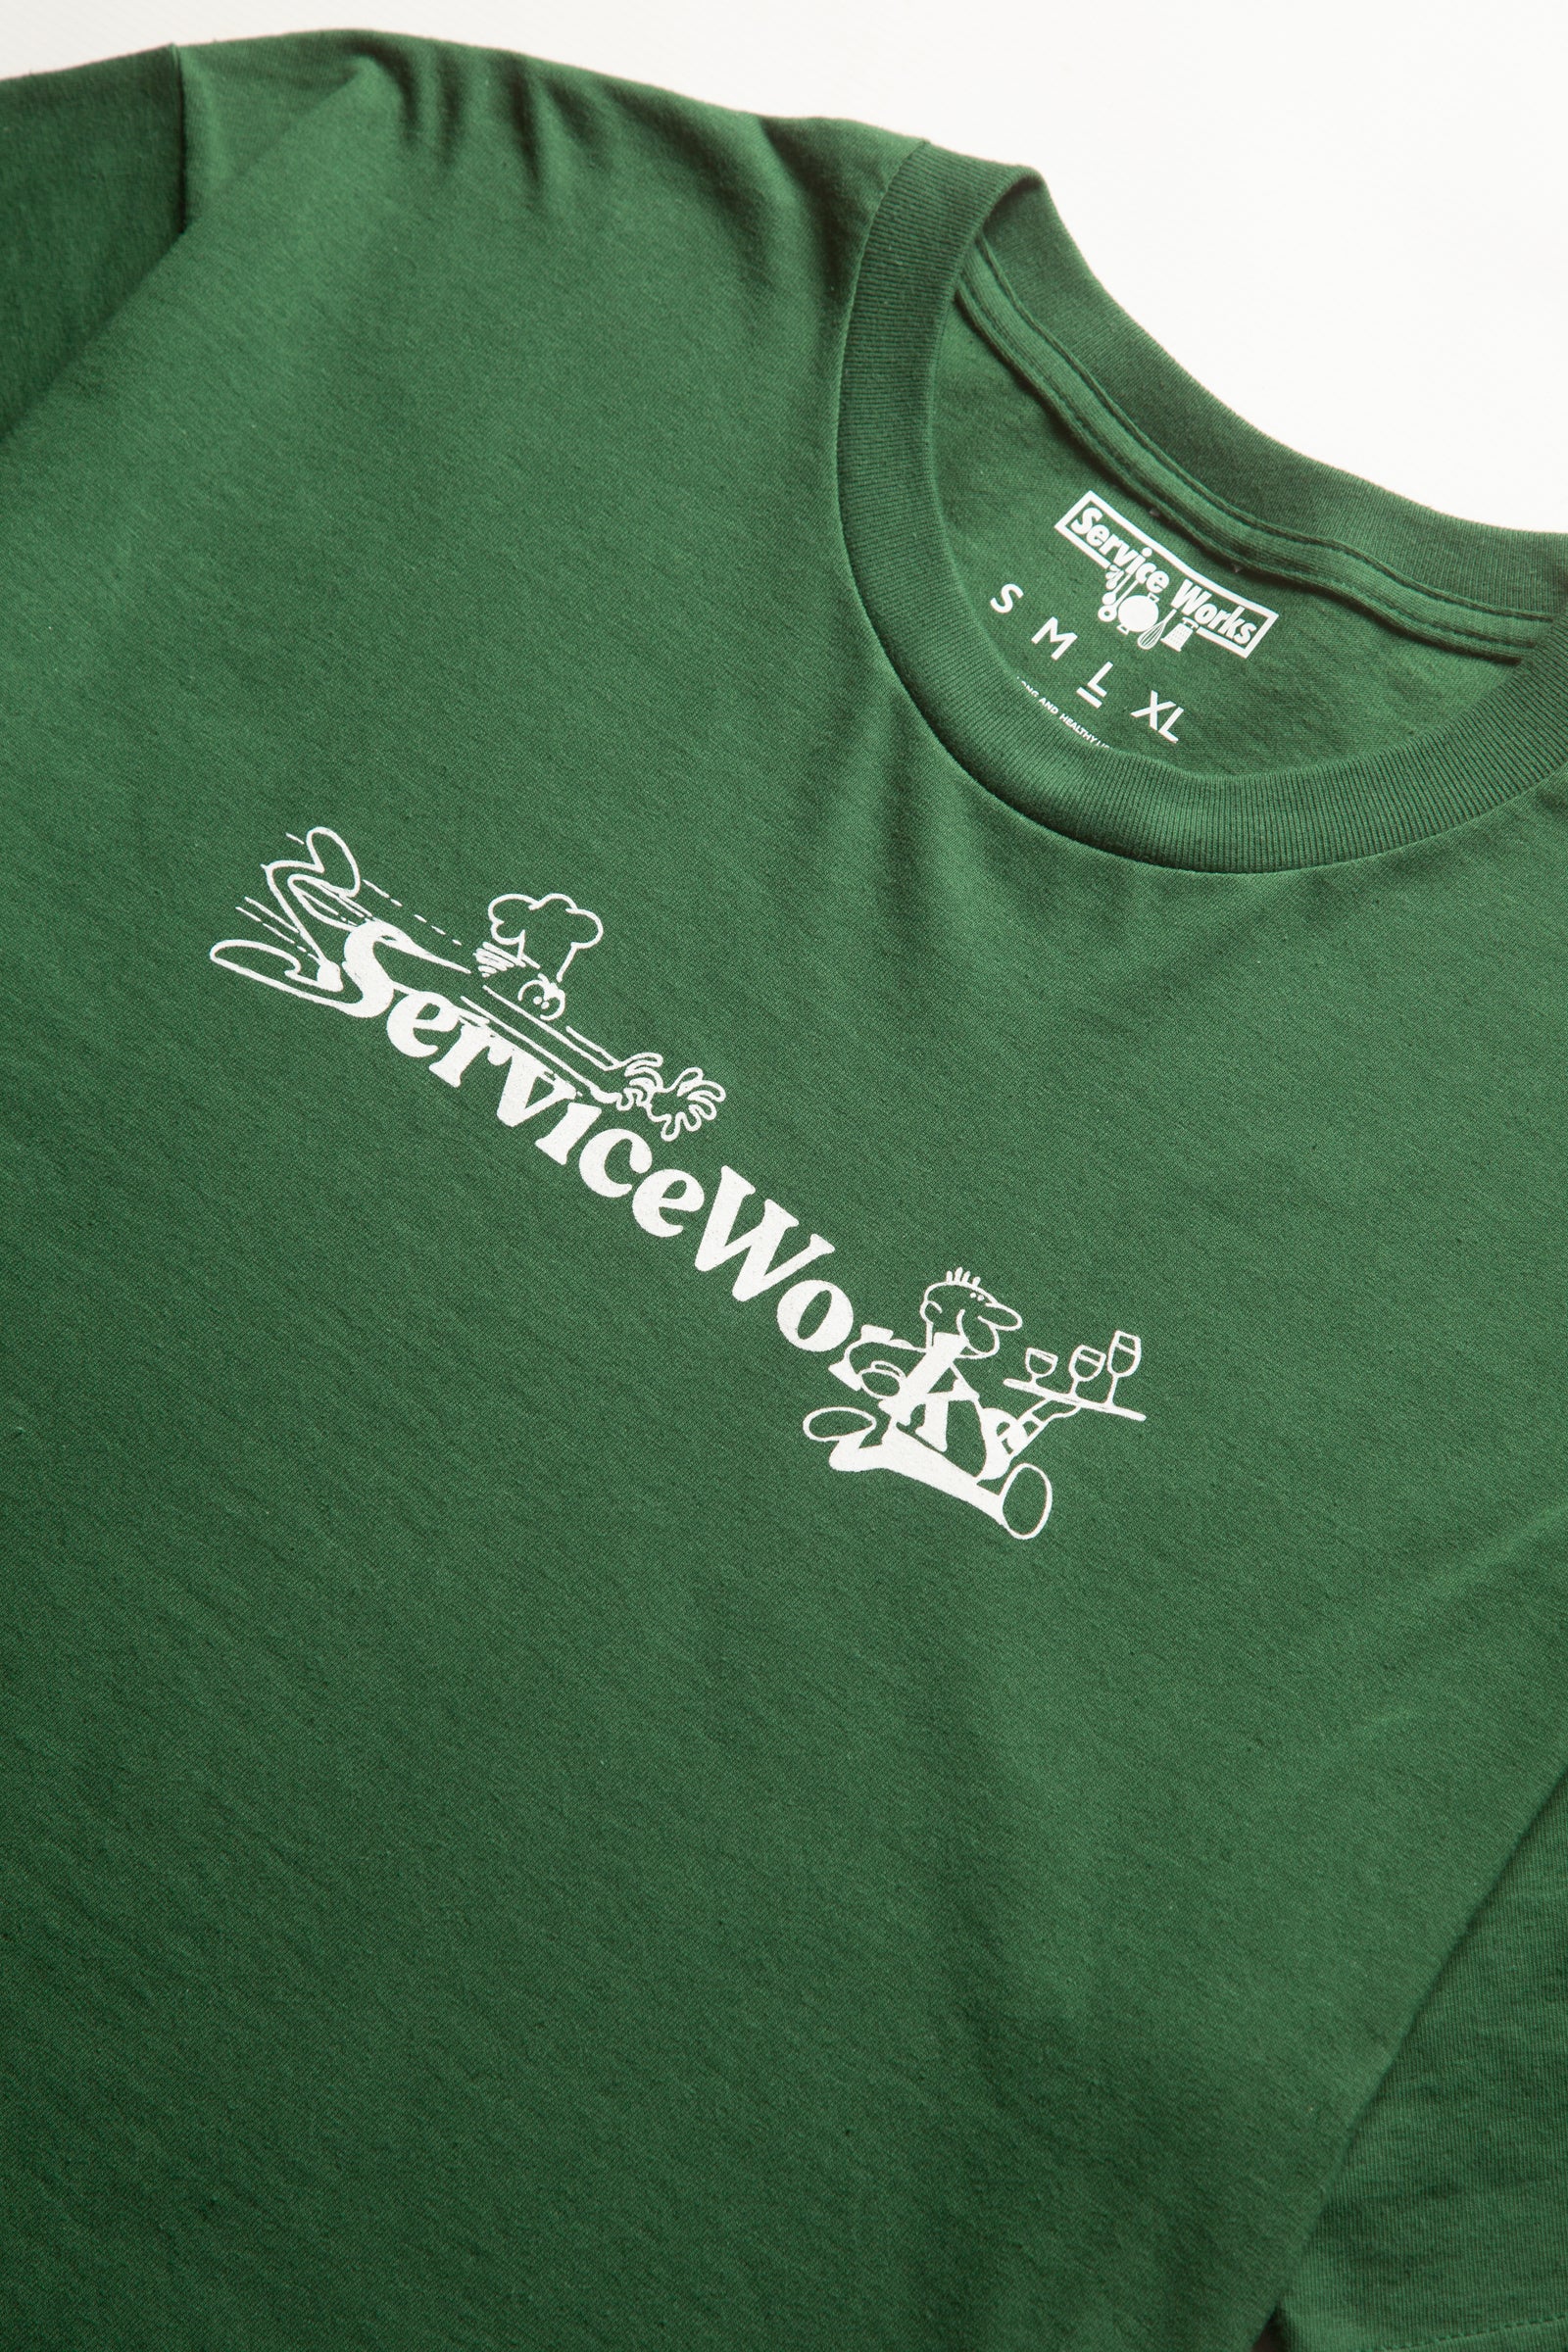 Service Works - Chase Tee - Forest Green